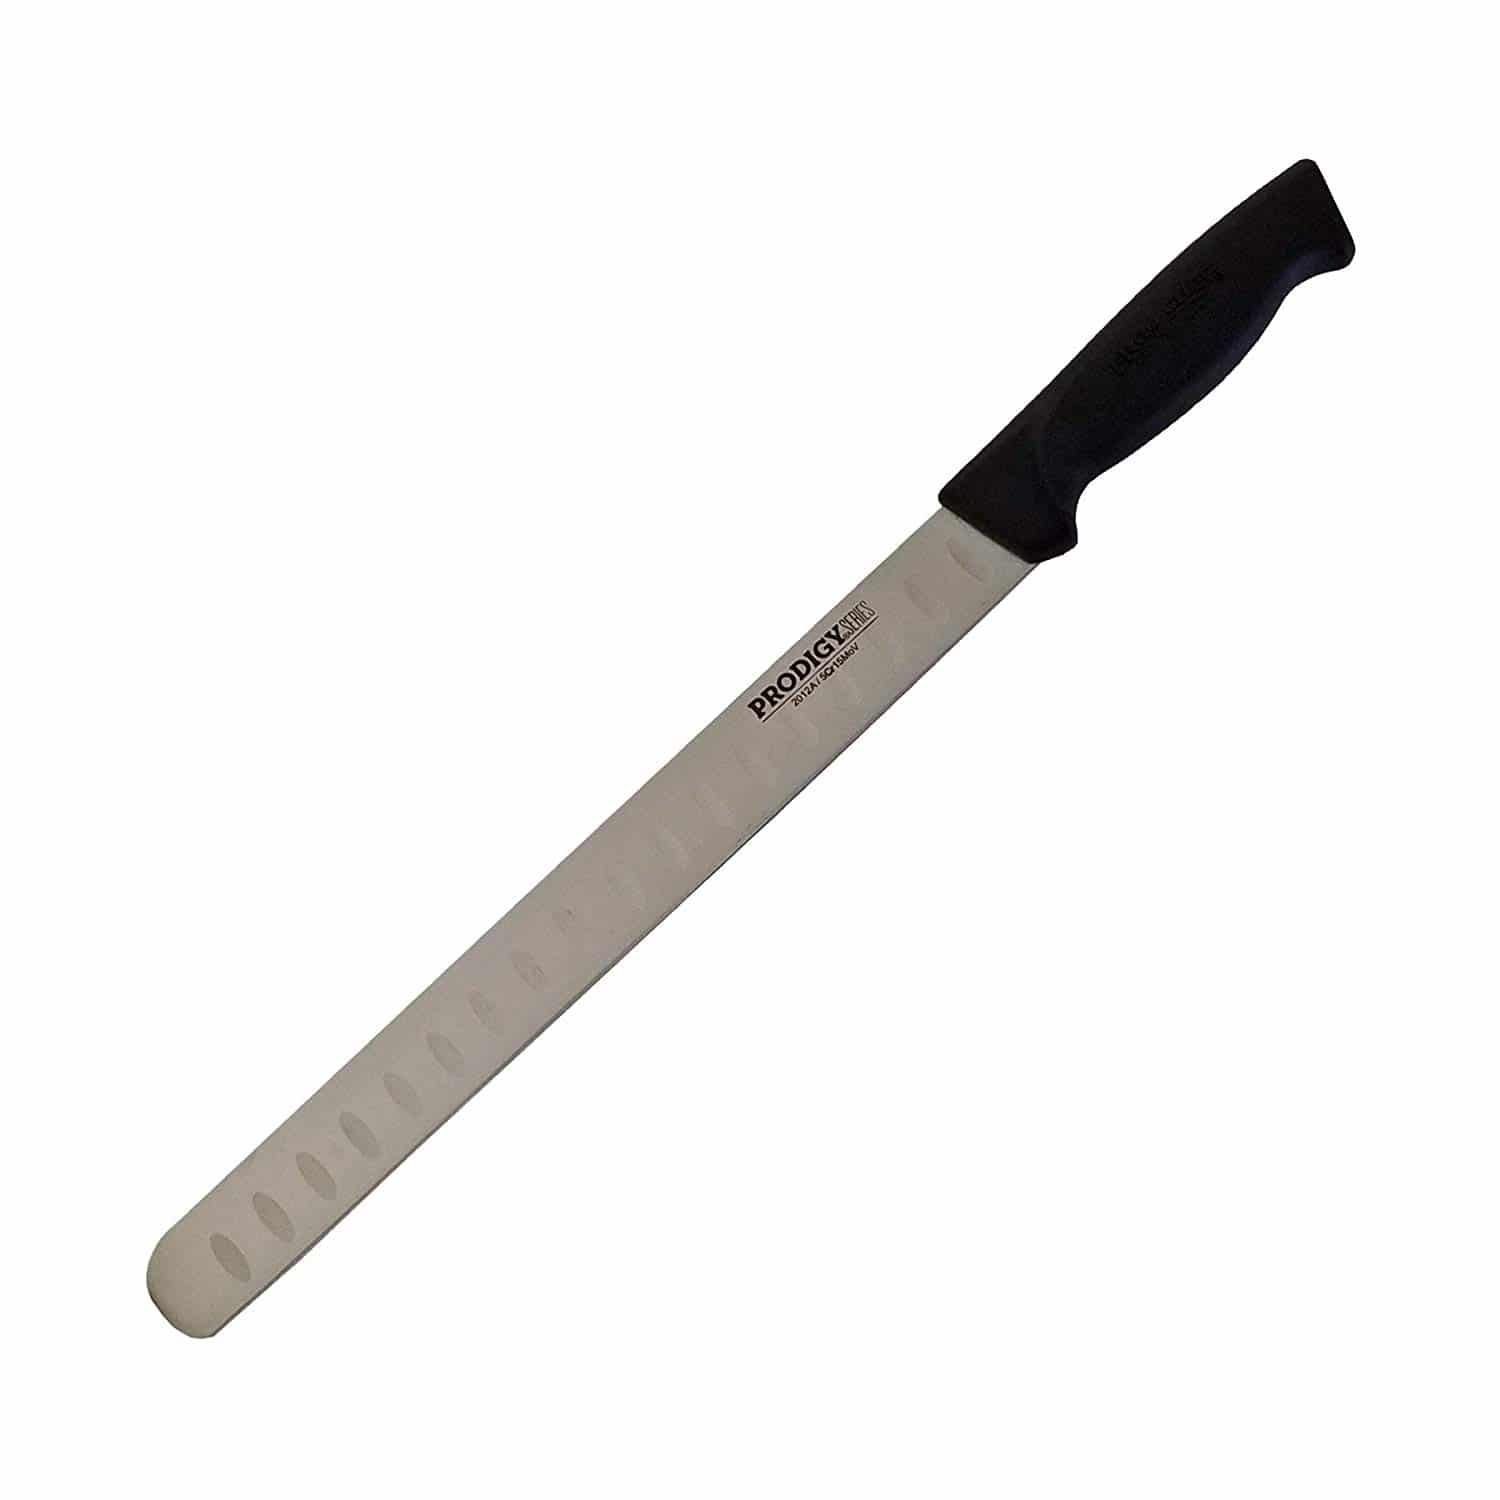 Ergo Chef Prodigy Series Meat Slicing and Carving Knife